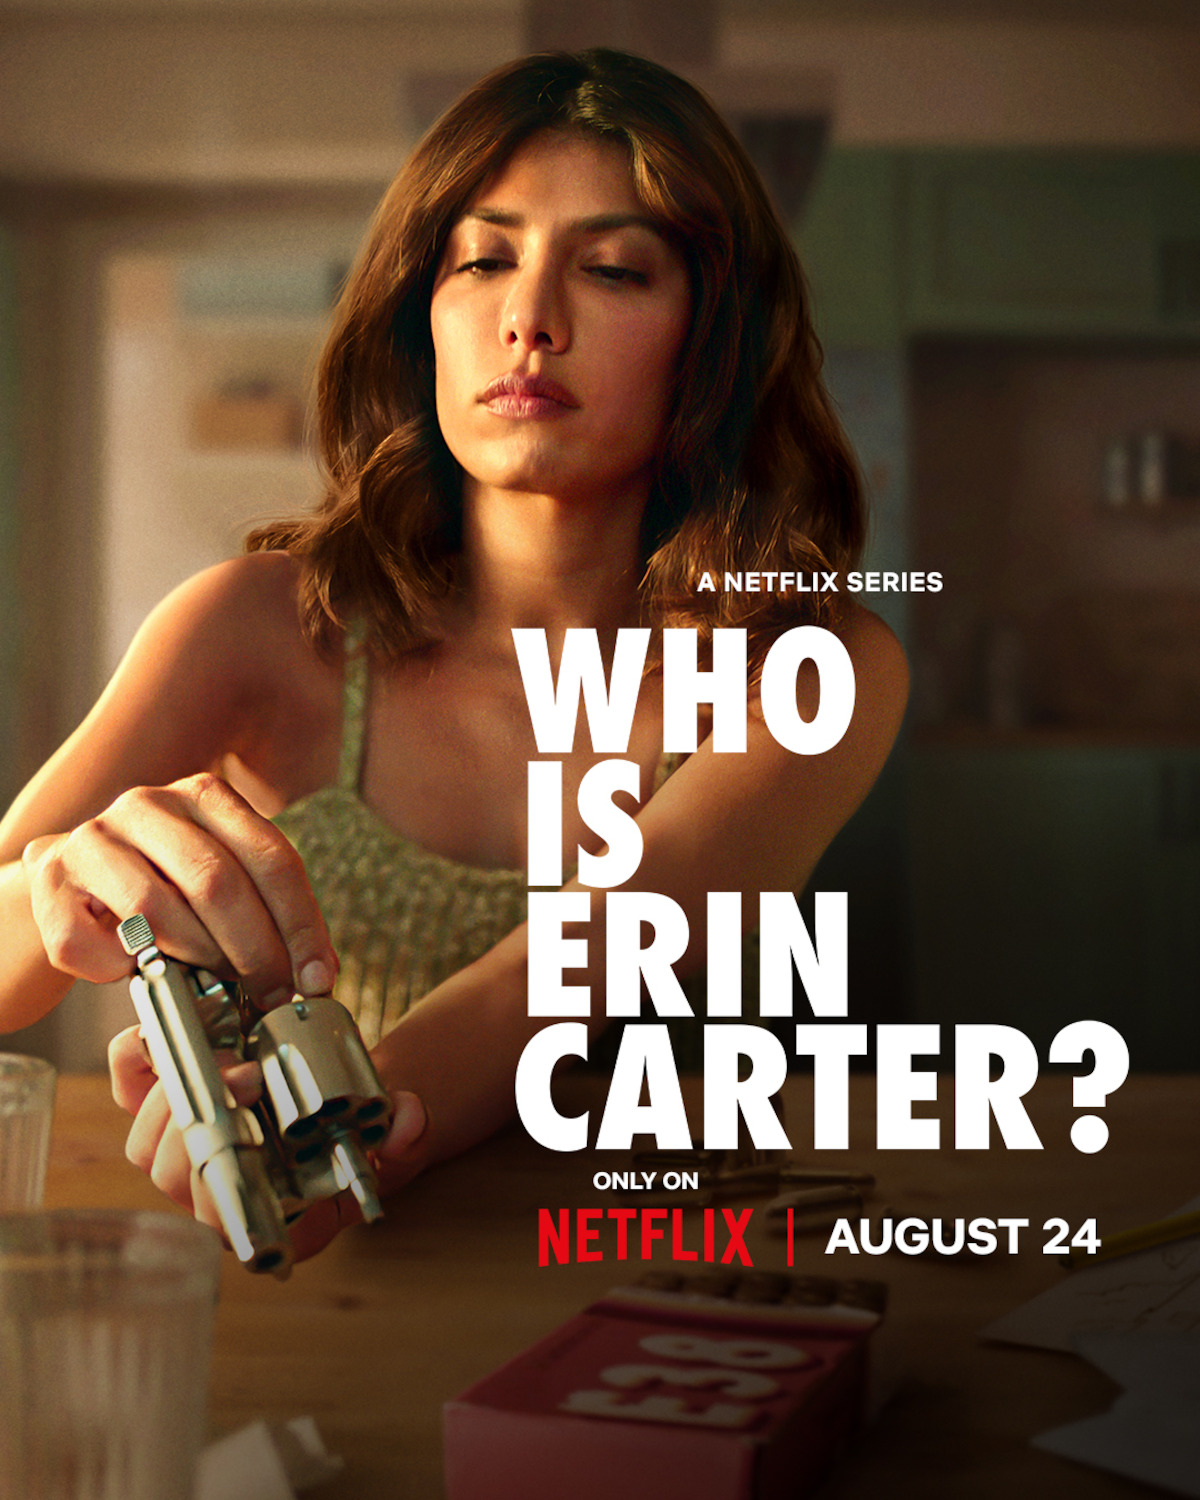 Who Is Erin Carter?: Everything You Need to Know About the Thriller Series  - Netflix Tudum